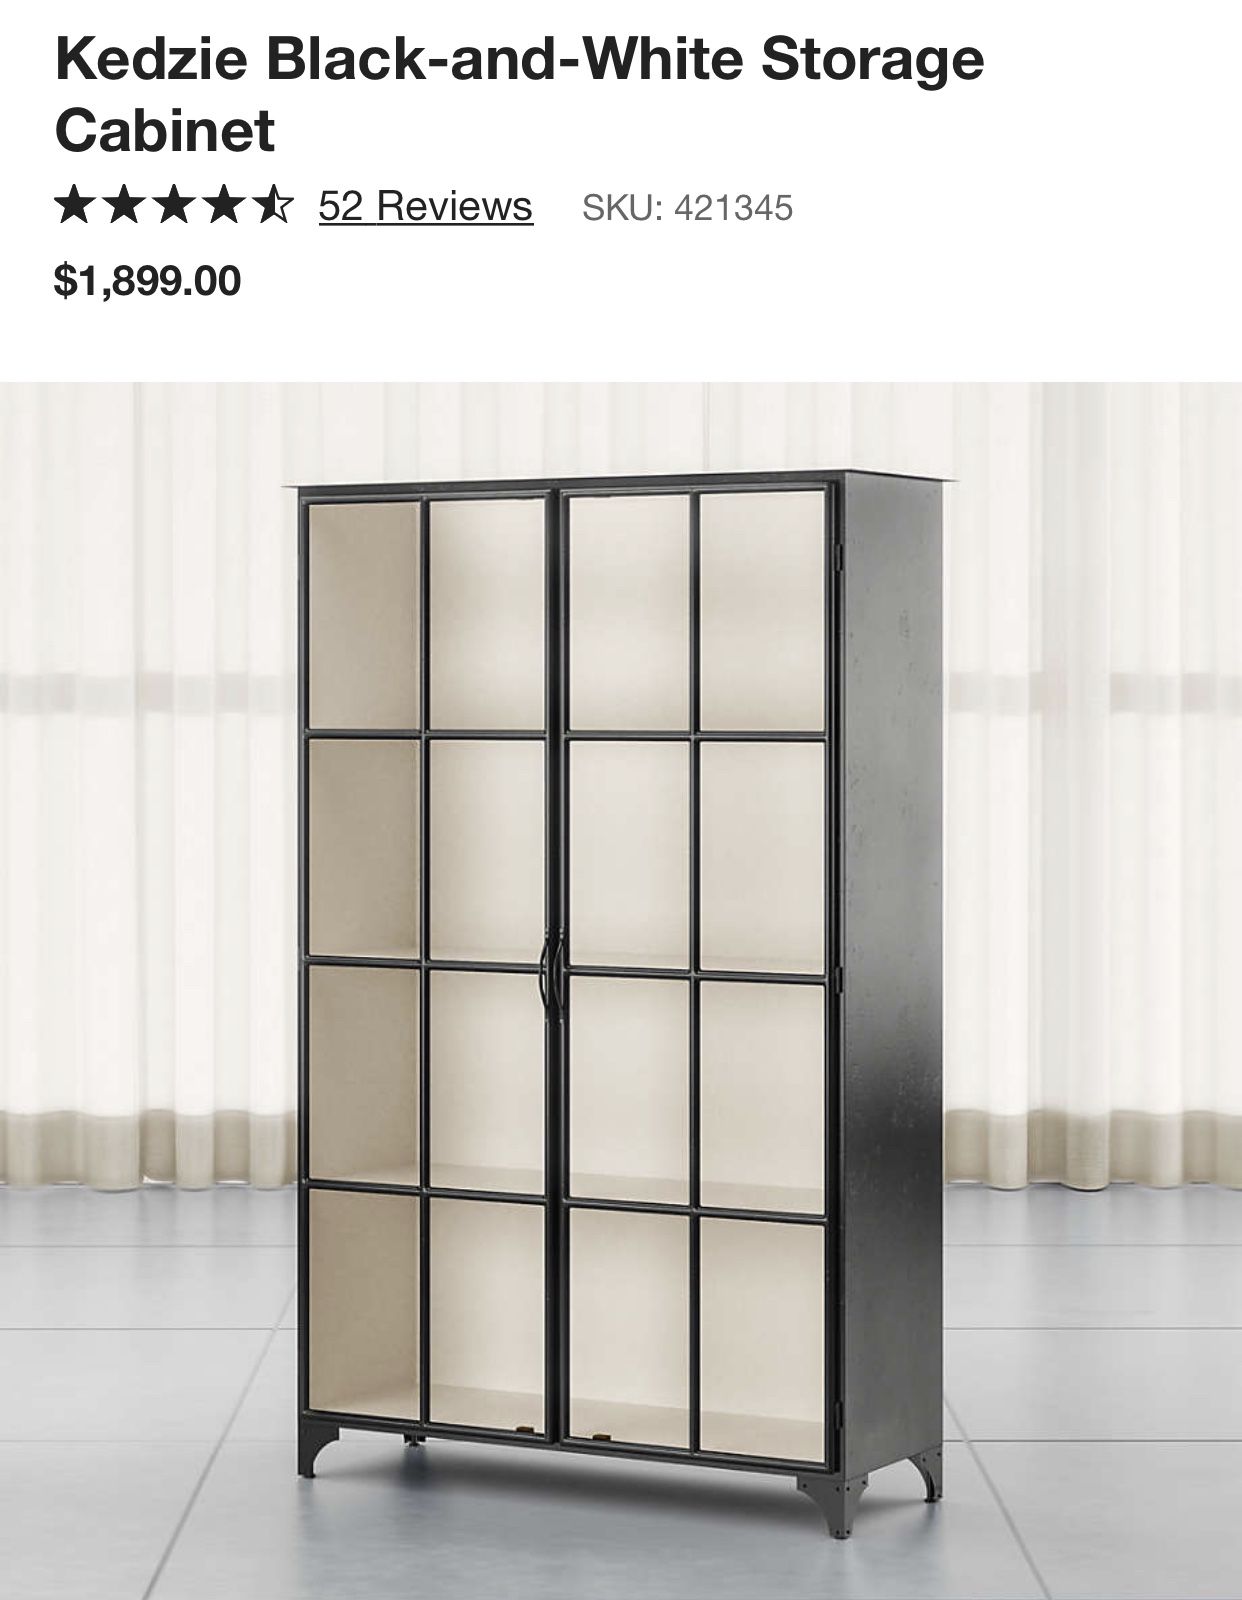 Black and Decker Plastic Storage Cabinet for Sale in Thornton, CO - OfferUp